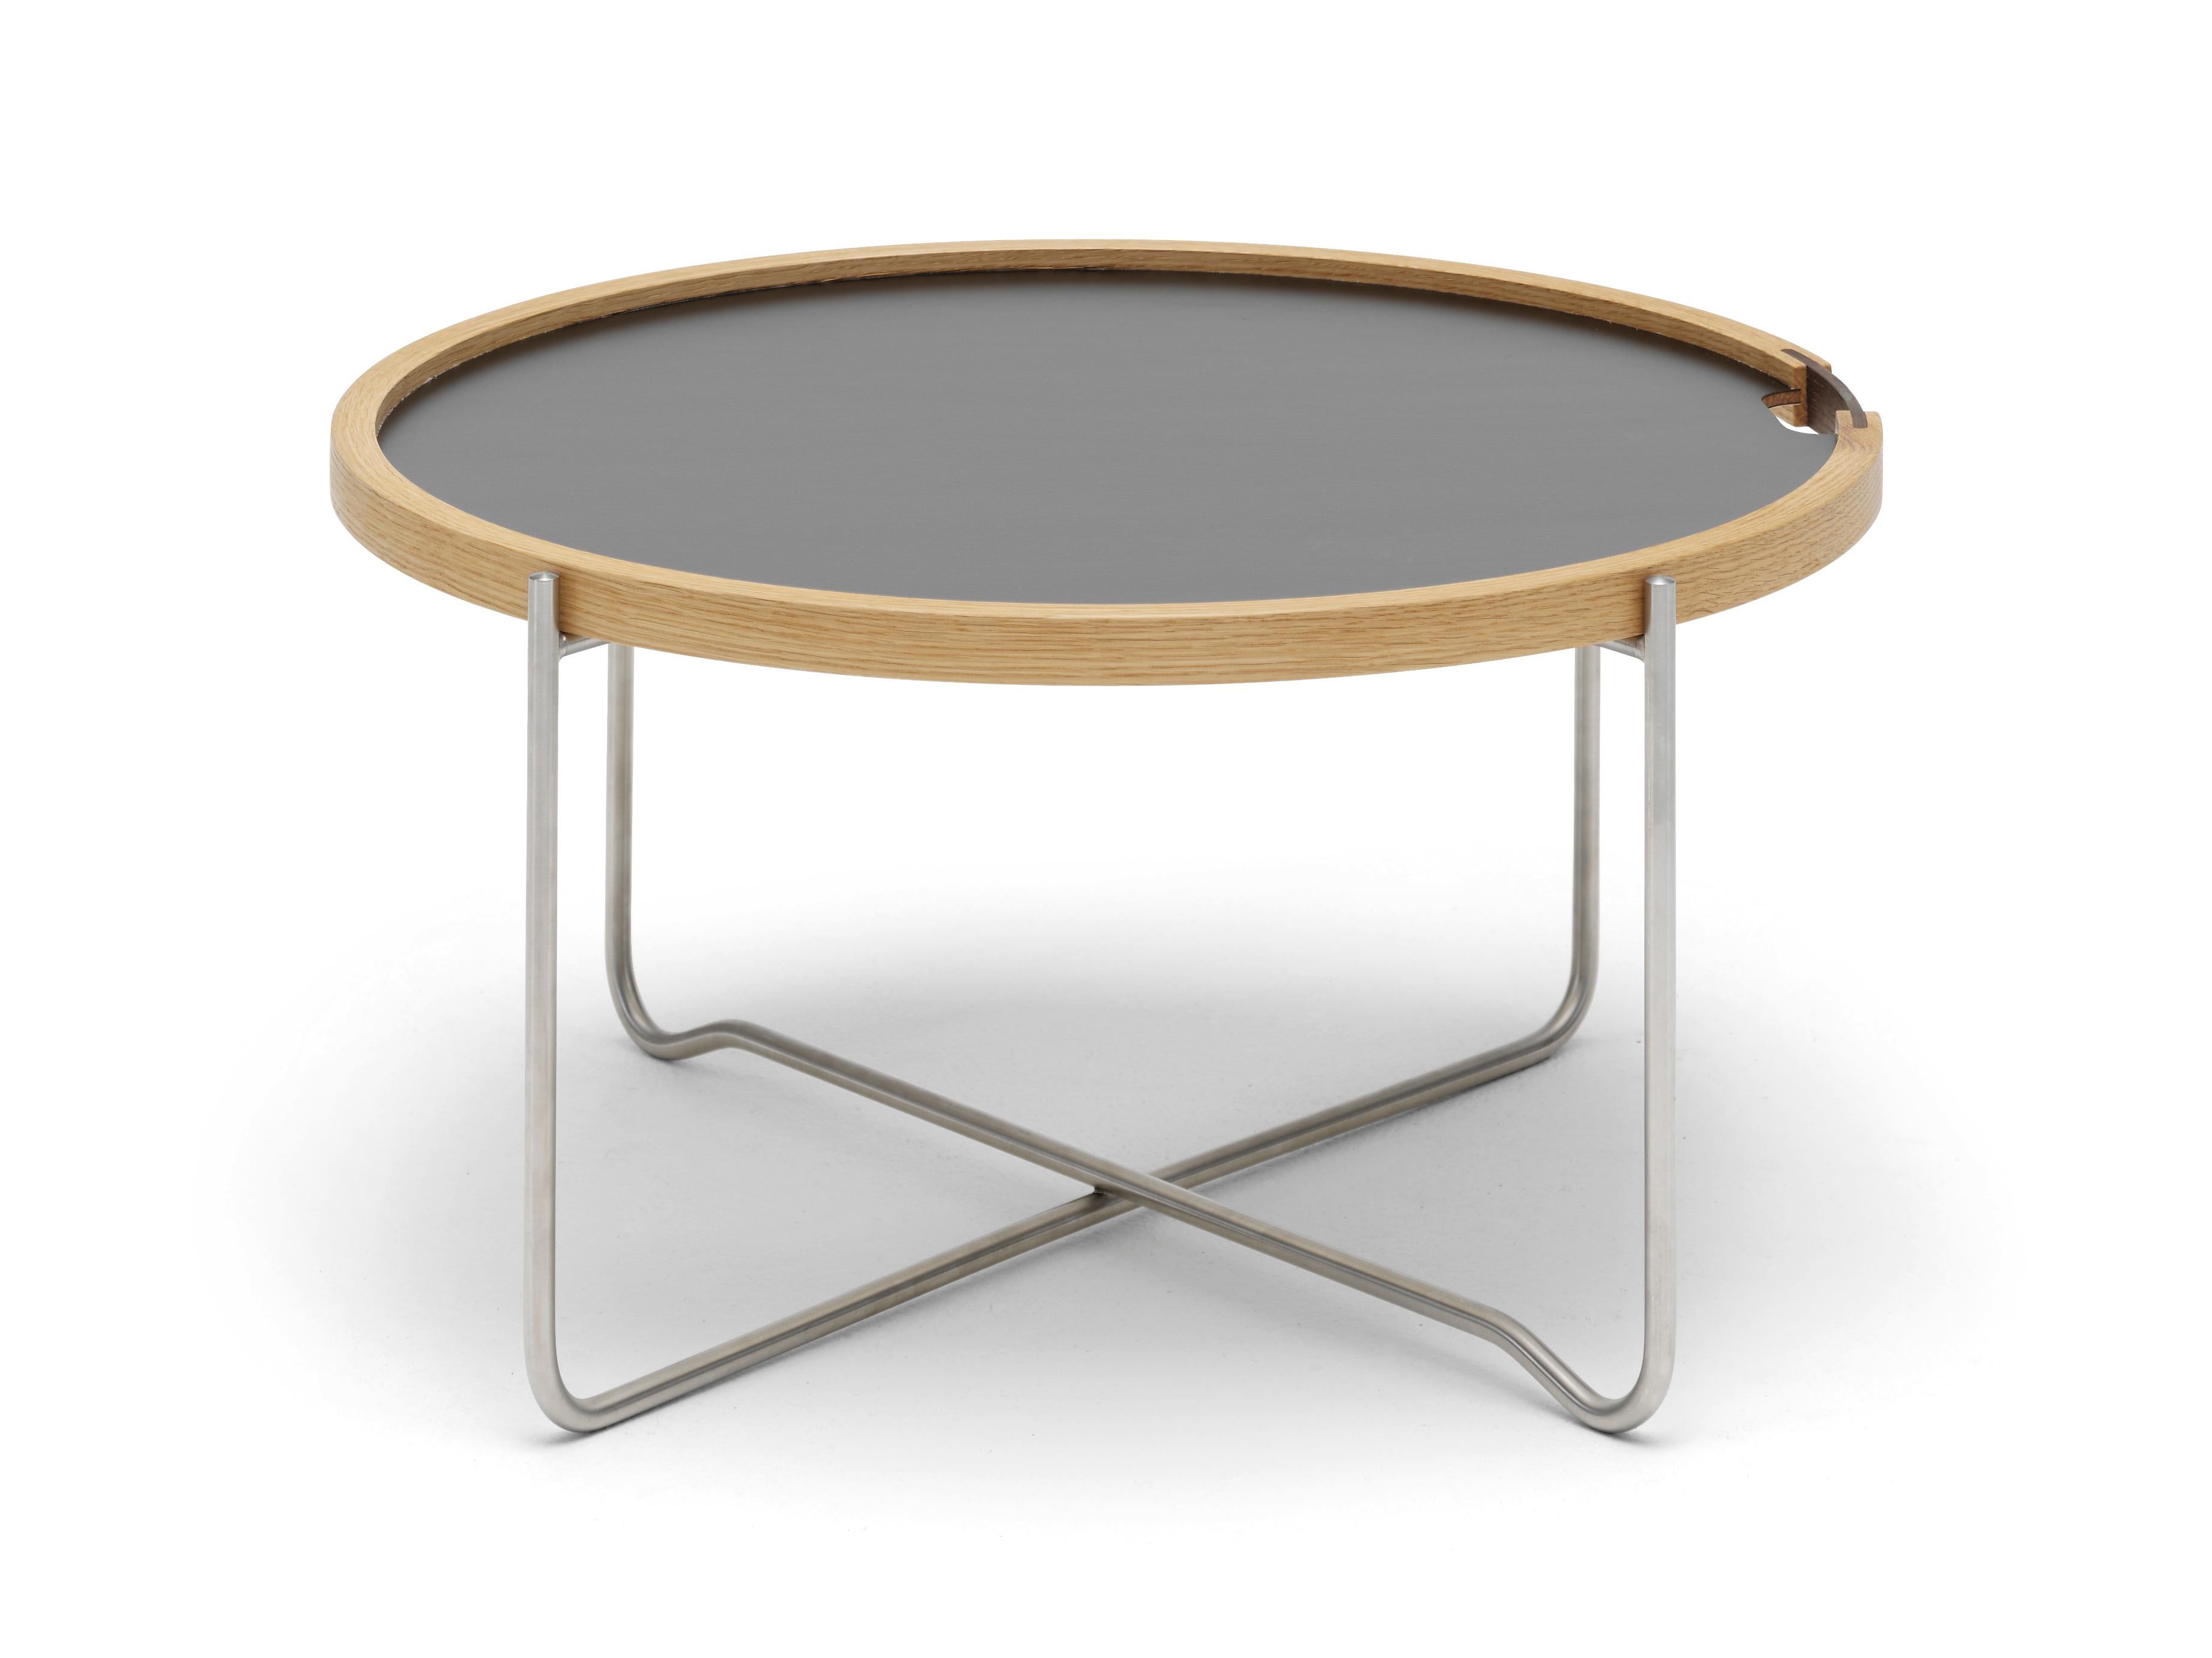 The CH417 tray table by Hans J. Wegner combines two parts, a reversible round tray and a collapsible base, into a smart, easy-to-store solution that is at once light and sturdy as well as practical and elegant. A natural oak rim contains the